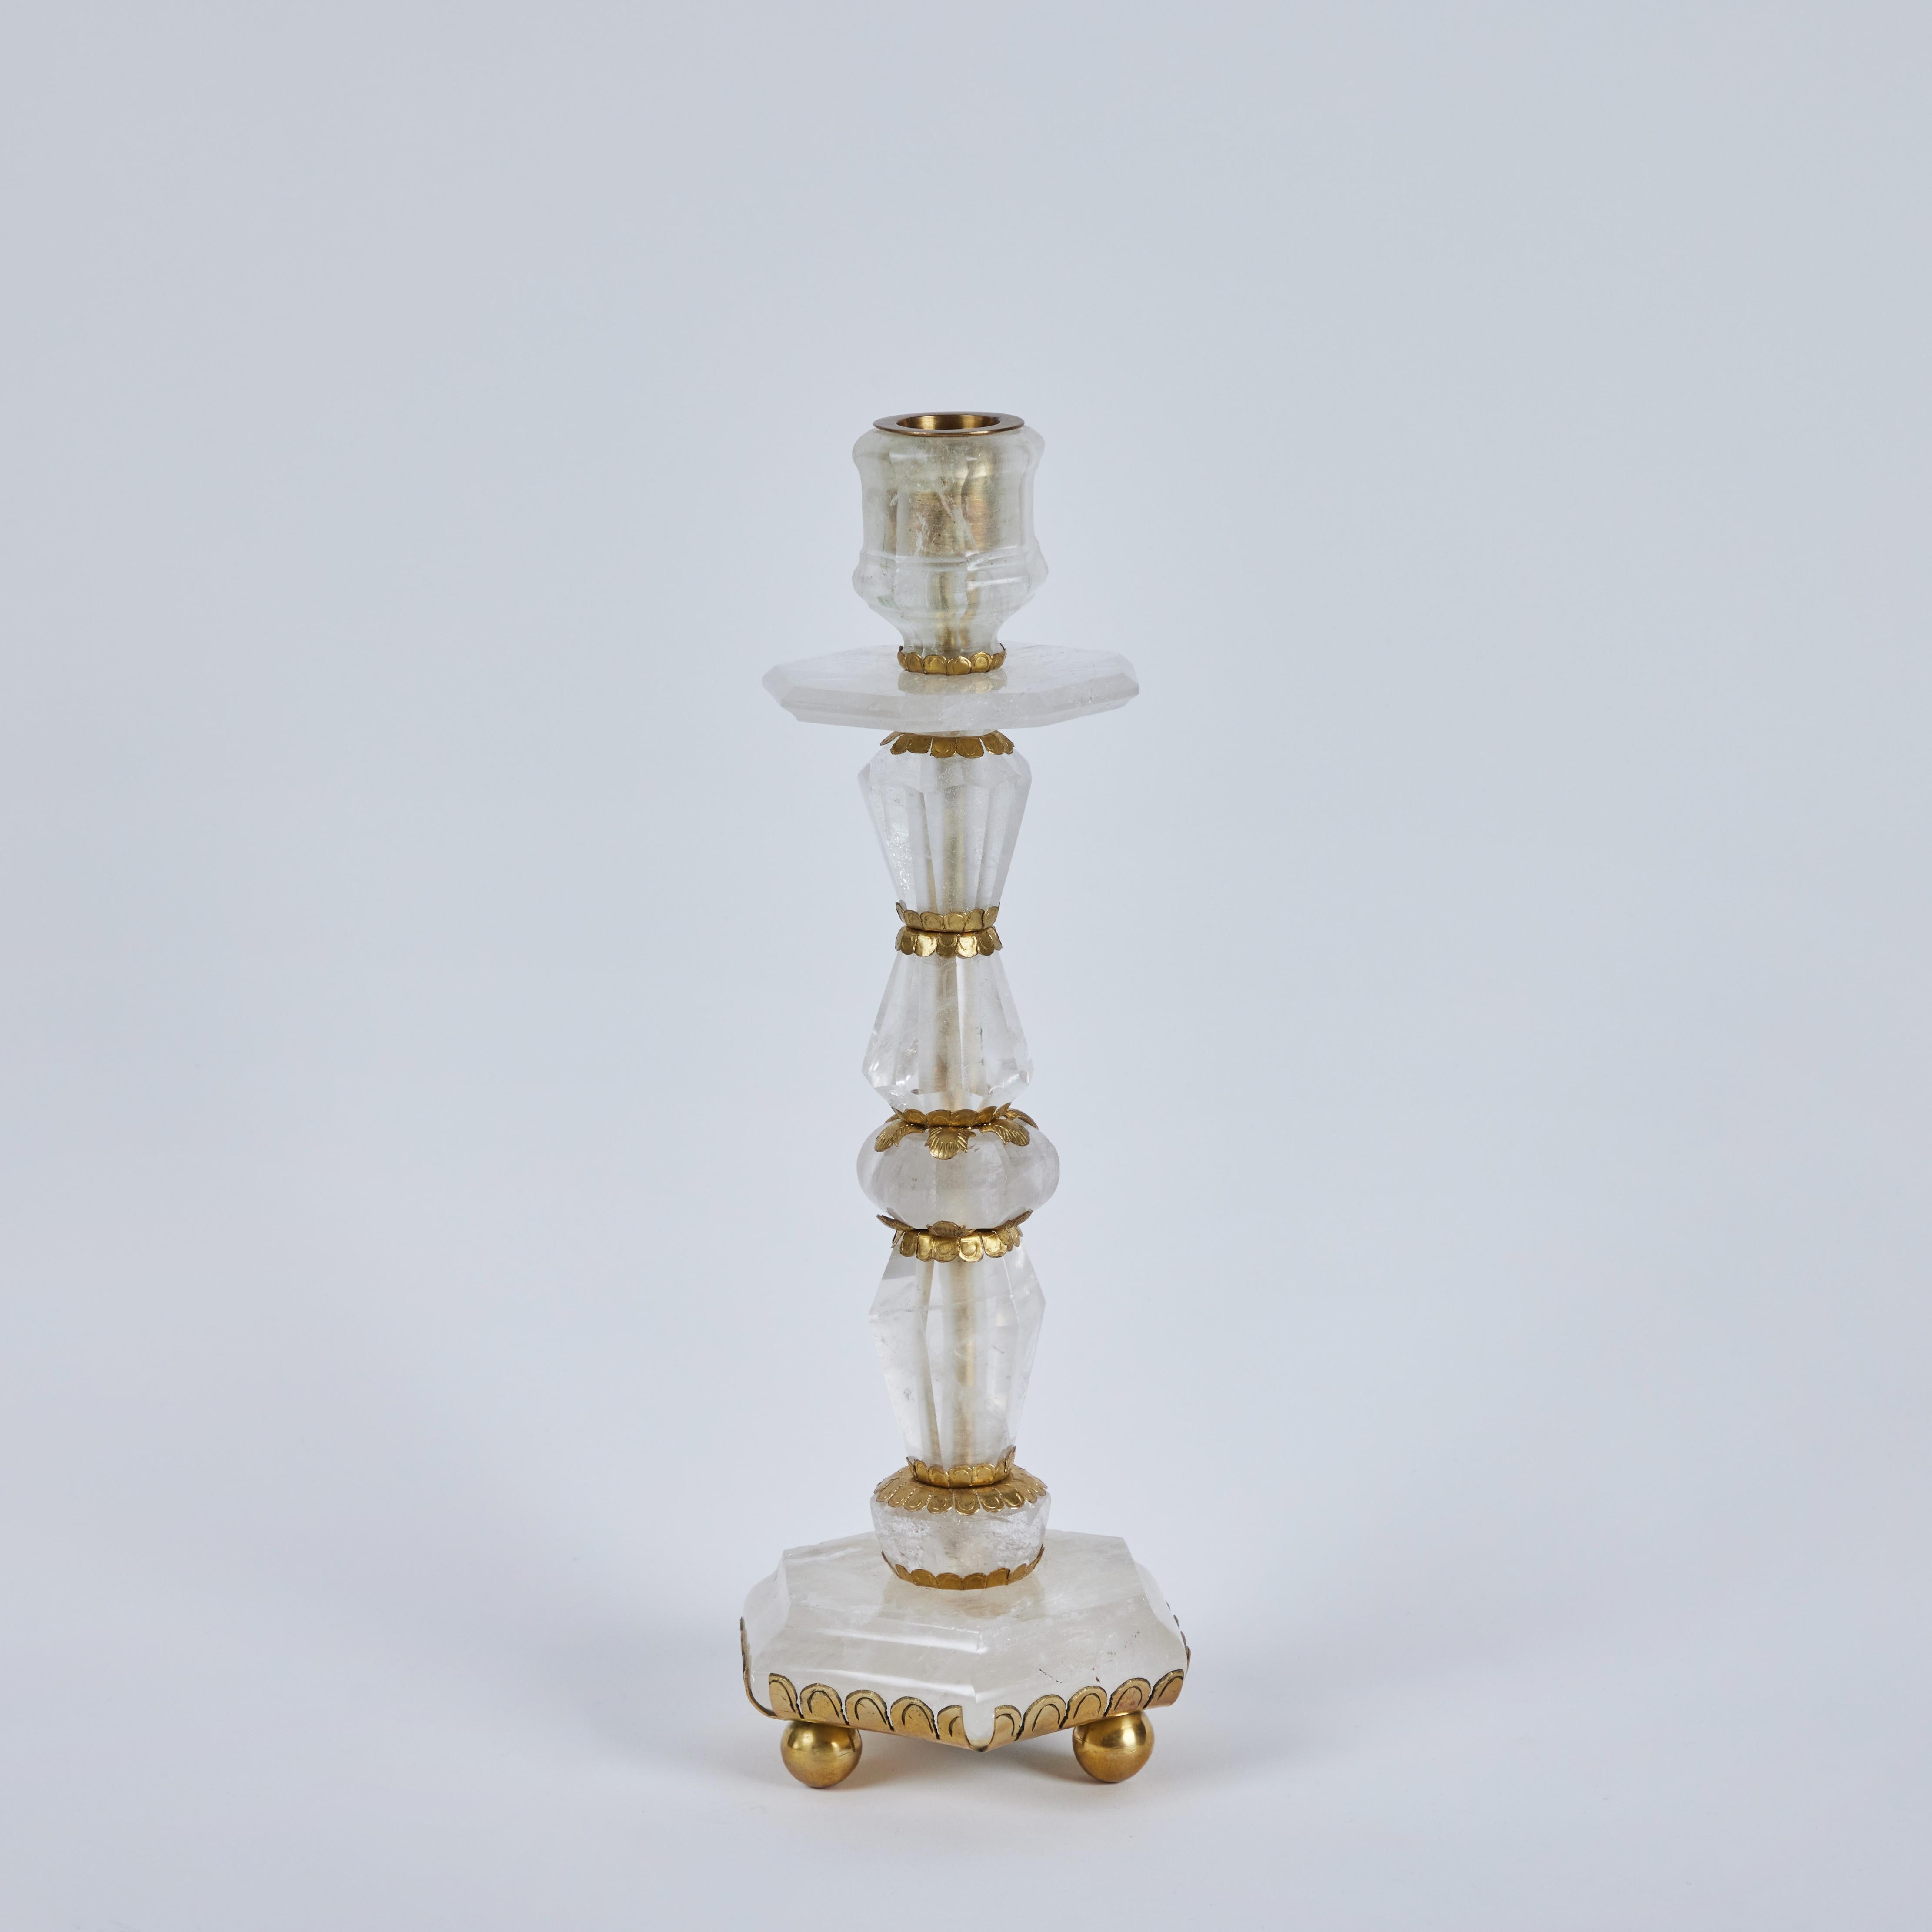 Carved and polished, tiered, faceted, rock crystal candlesticks with incised brass detail. Rock crystal from Madagascar, modern fabrication in France.